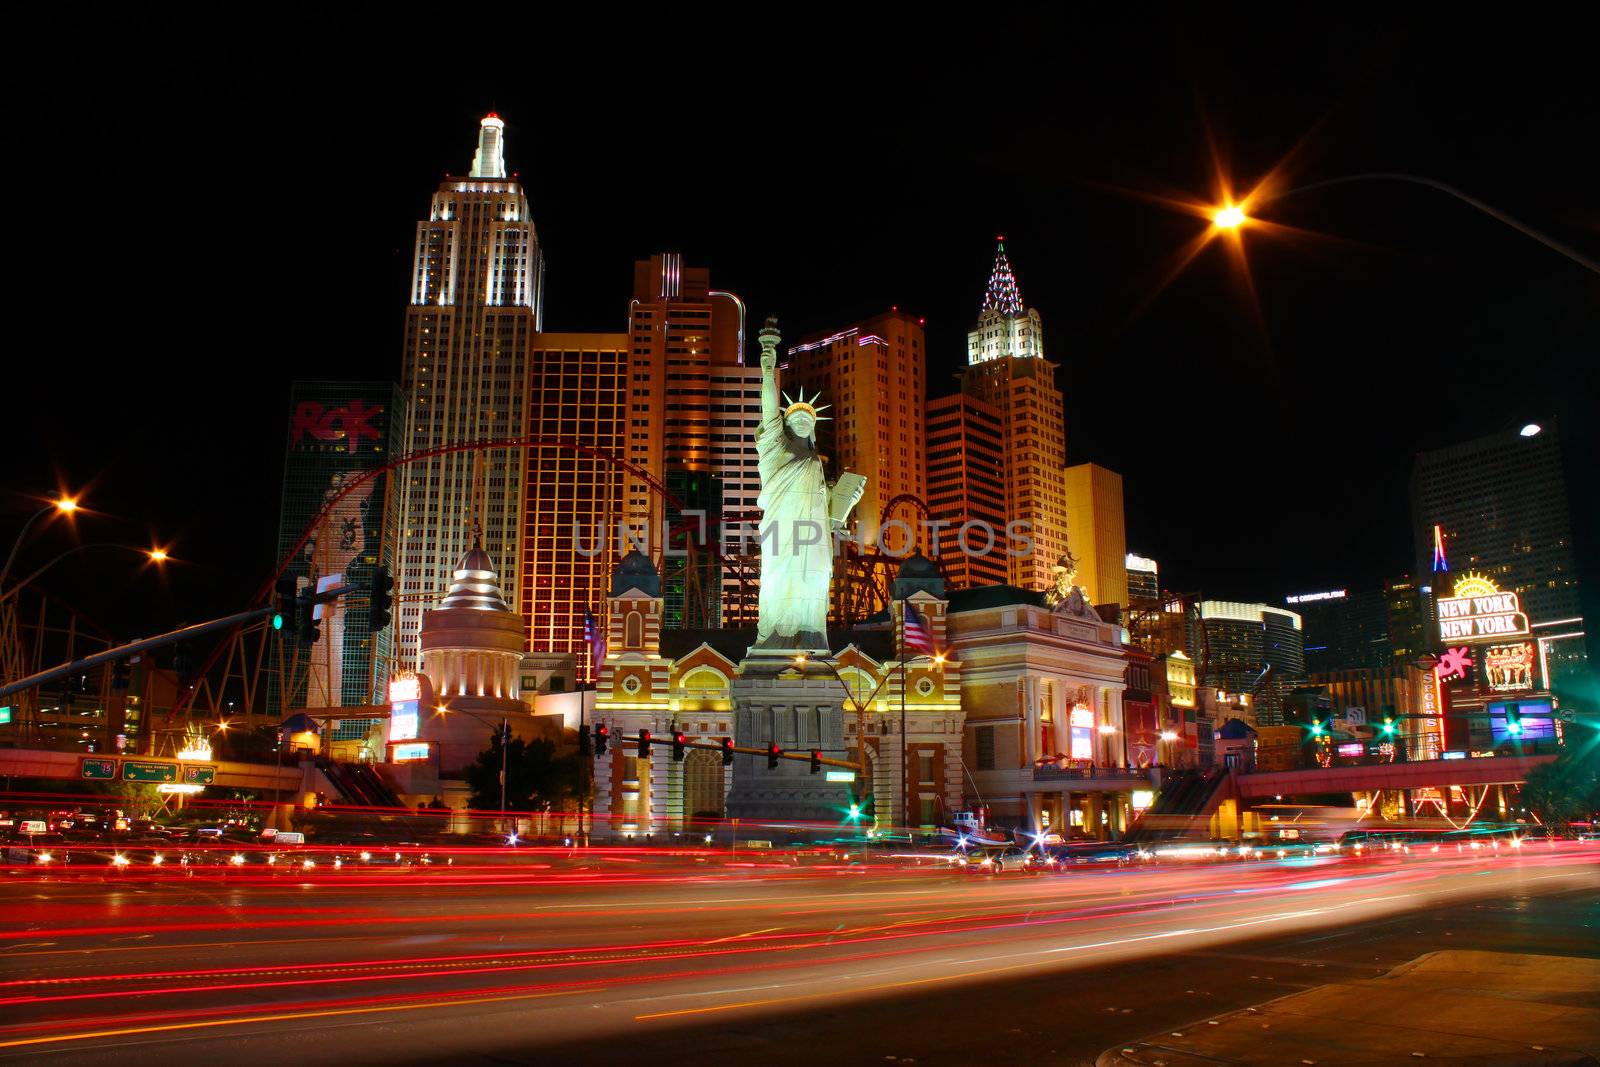 Las Vegas, USA - October 29, 2011: The New York New York Hotel and Casino in Las Vegas on Tropicana Avenue and Las Vegas Boulevard features a replica of the Statue of Liberty.  The architecture of the resort and casino is made to look like the skyline of New York.